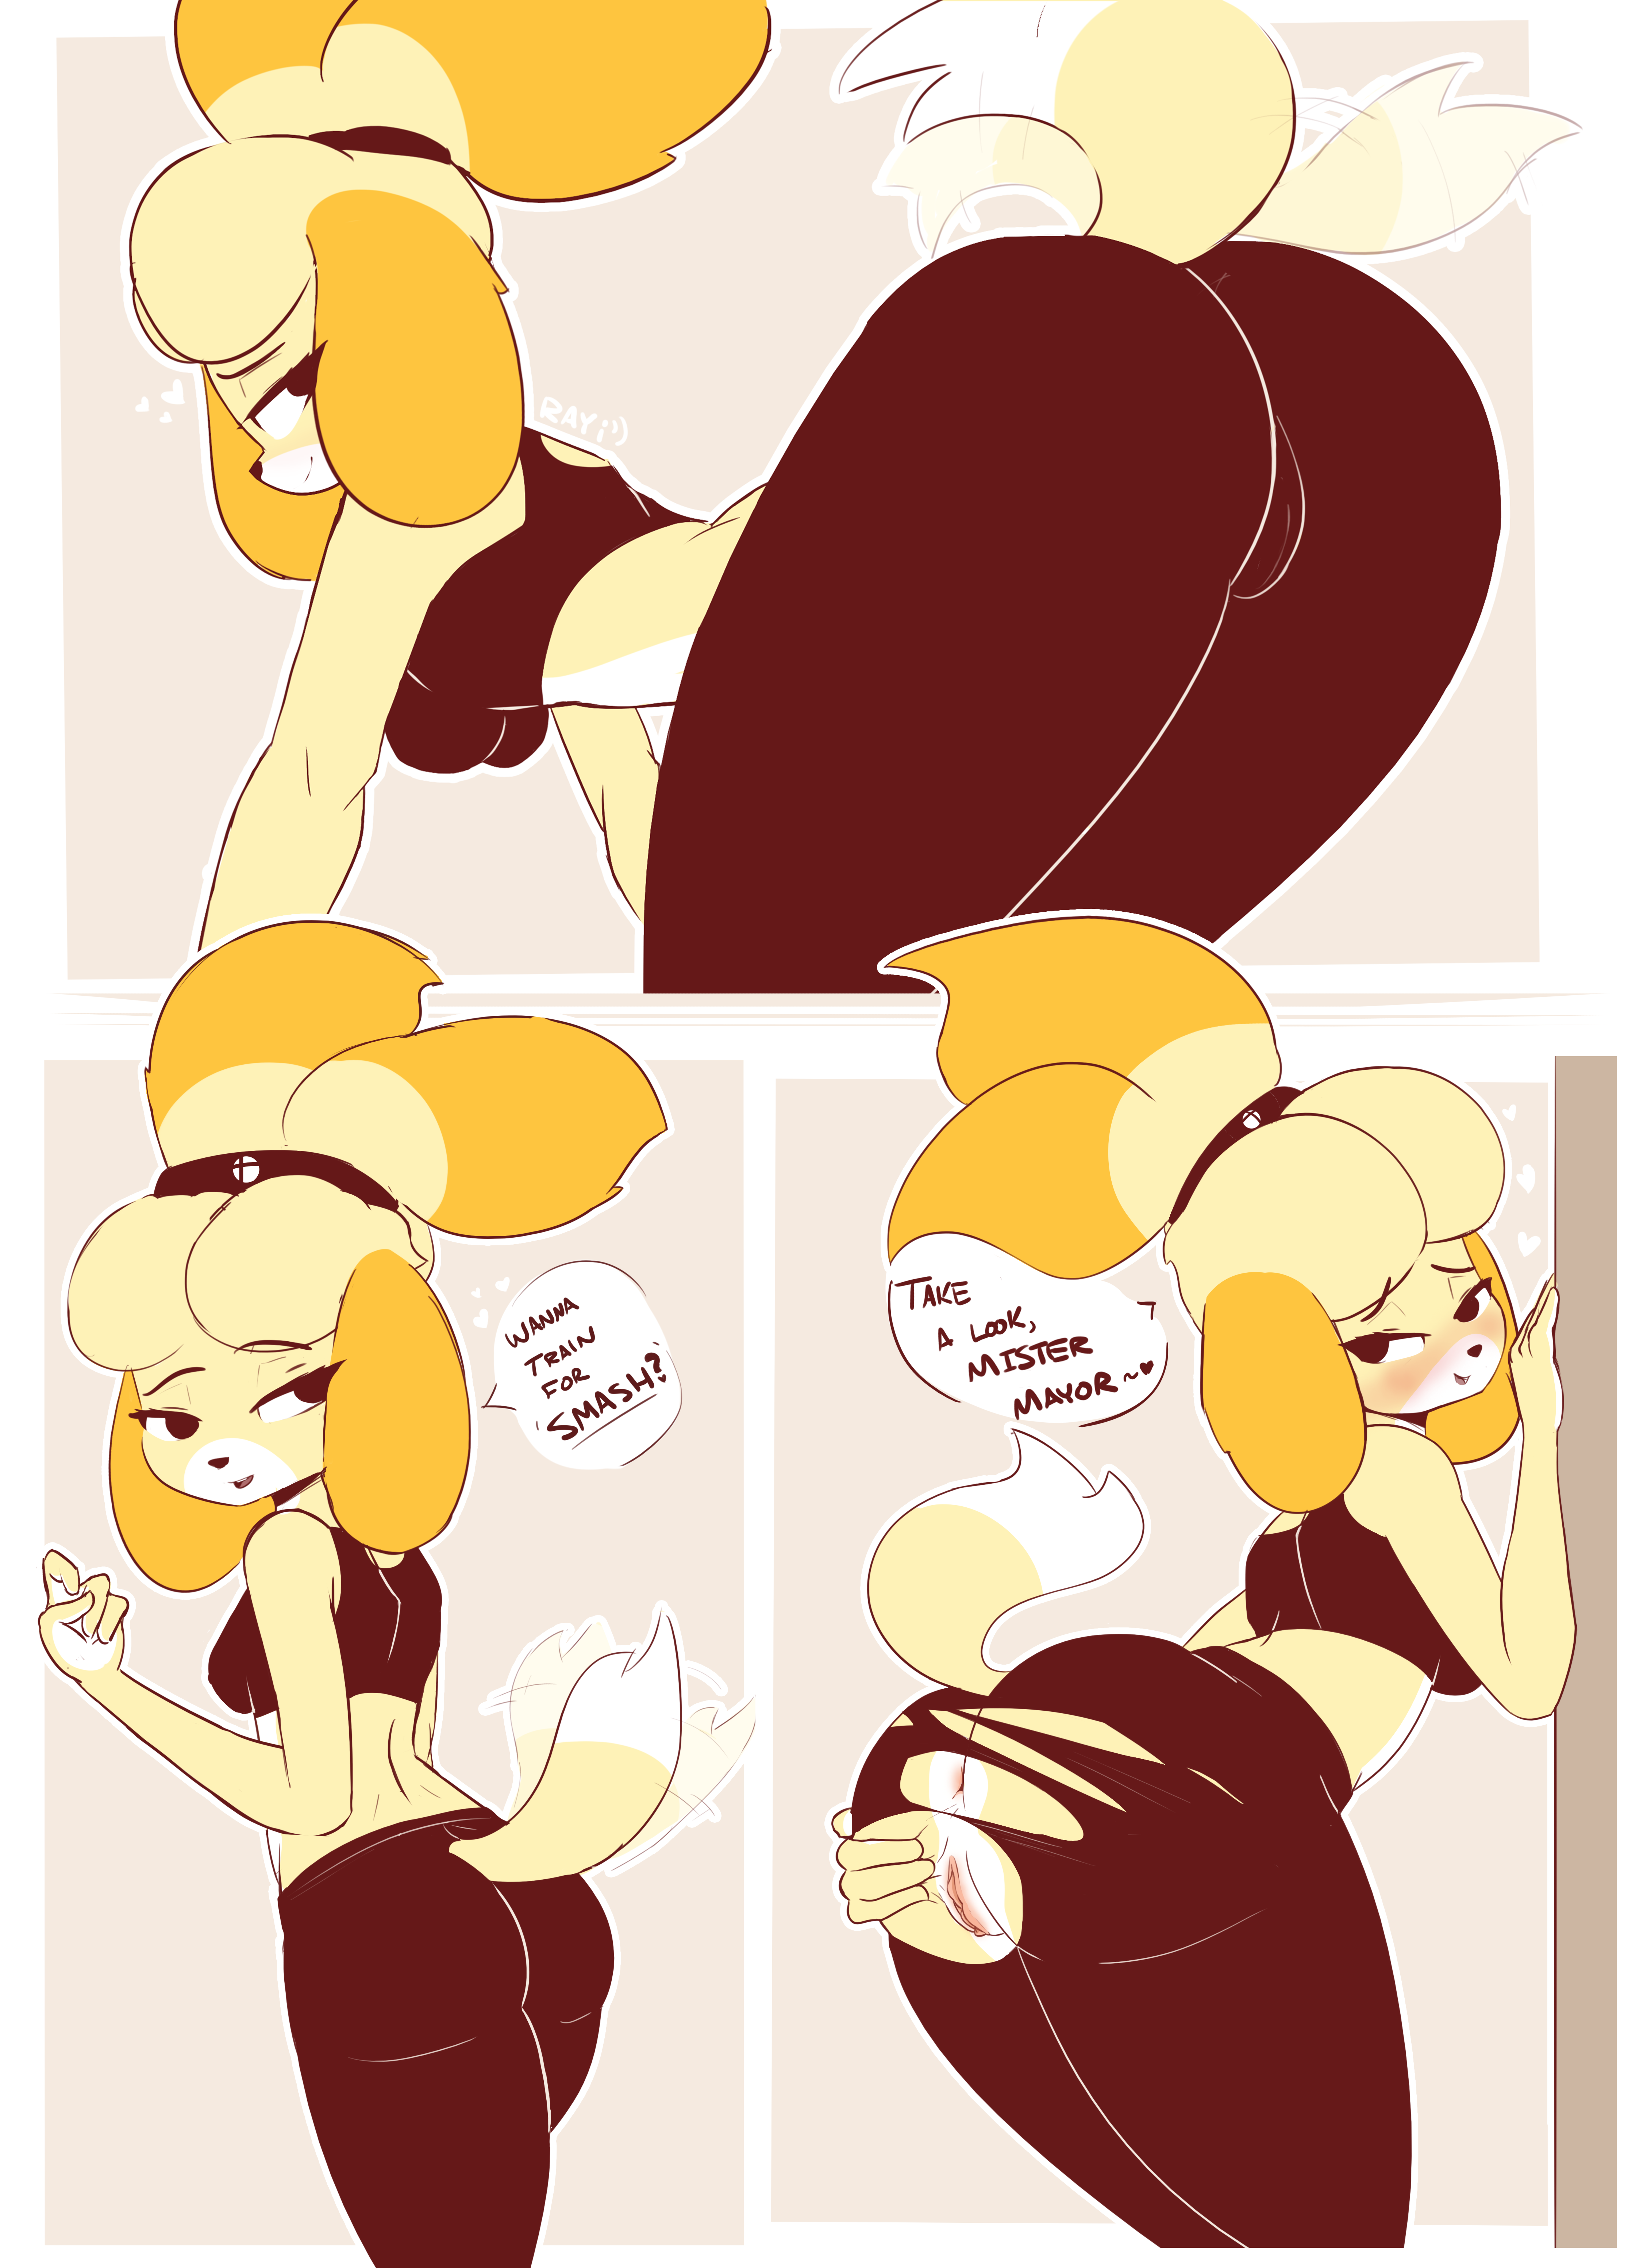 Isabelle wants to train